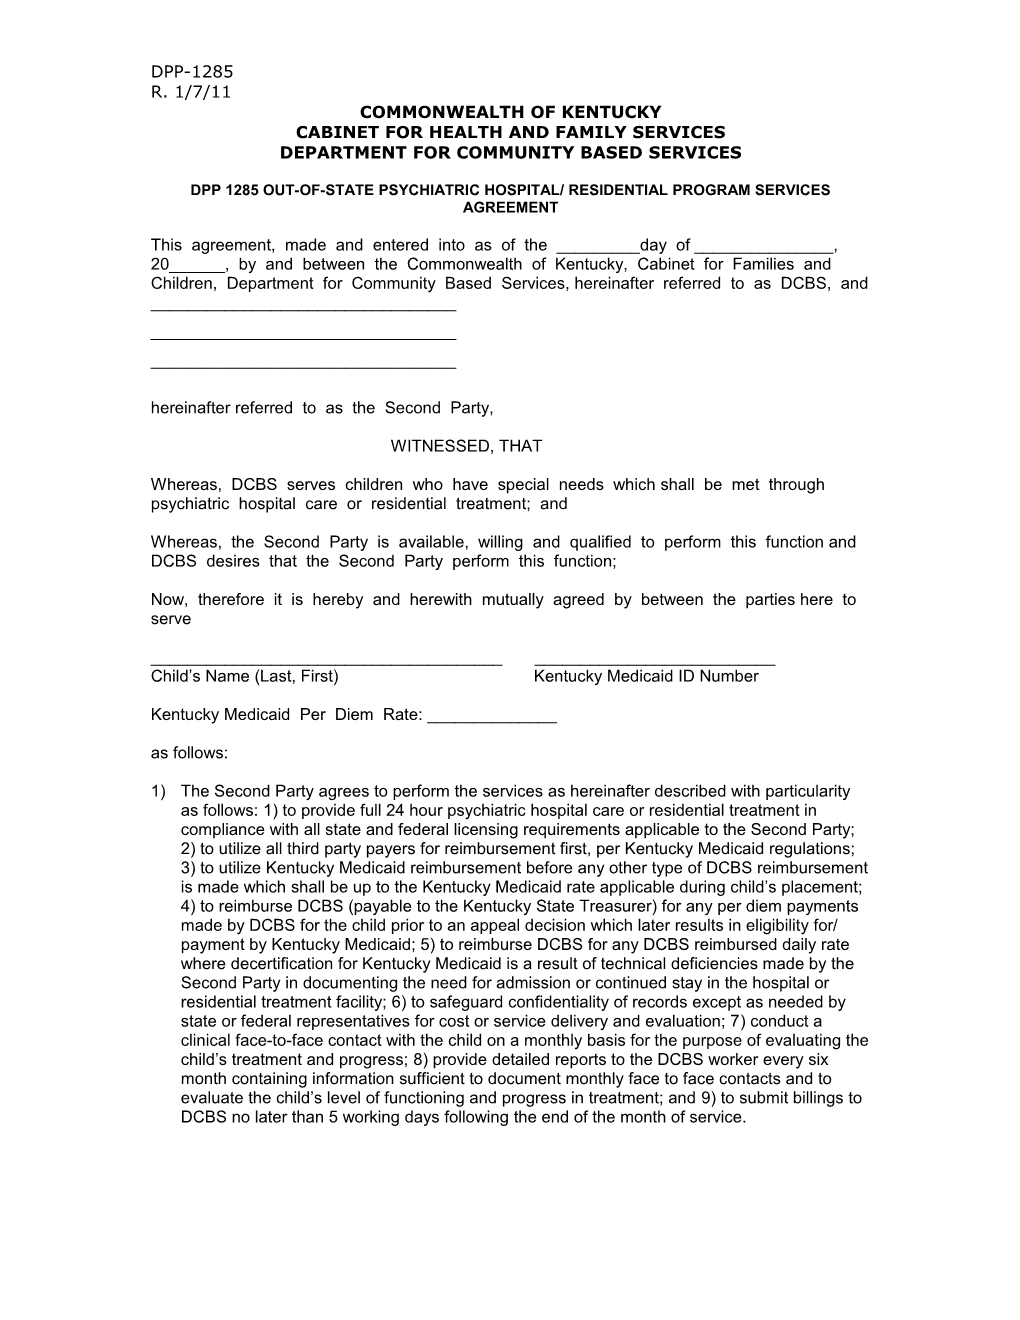 Out of State Psychiatric Hospital-Residential Program Services Agreement